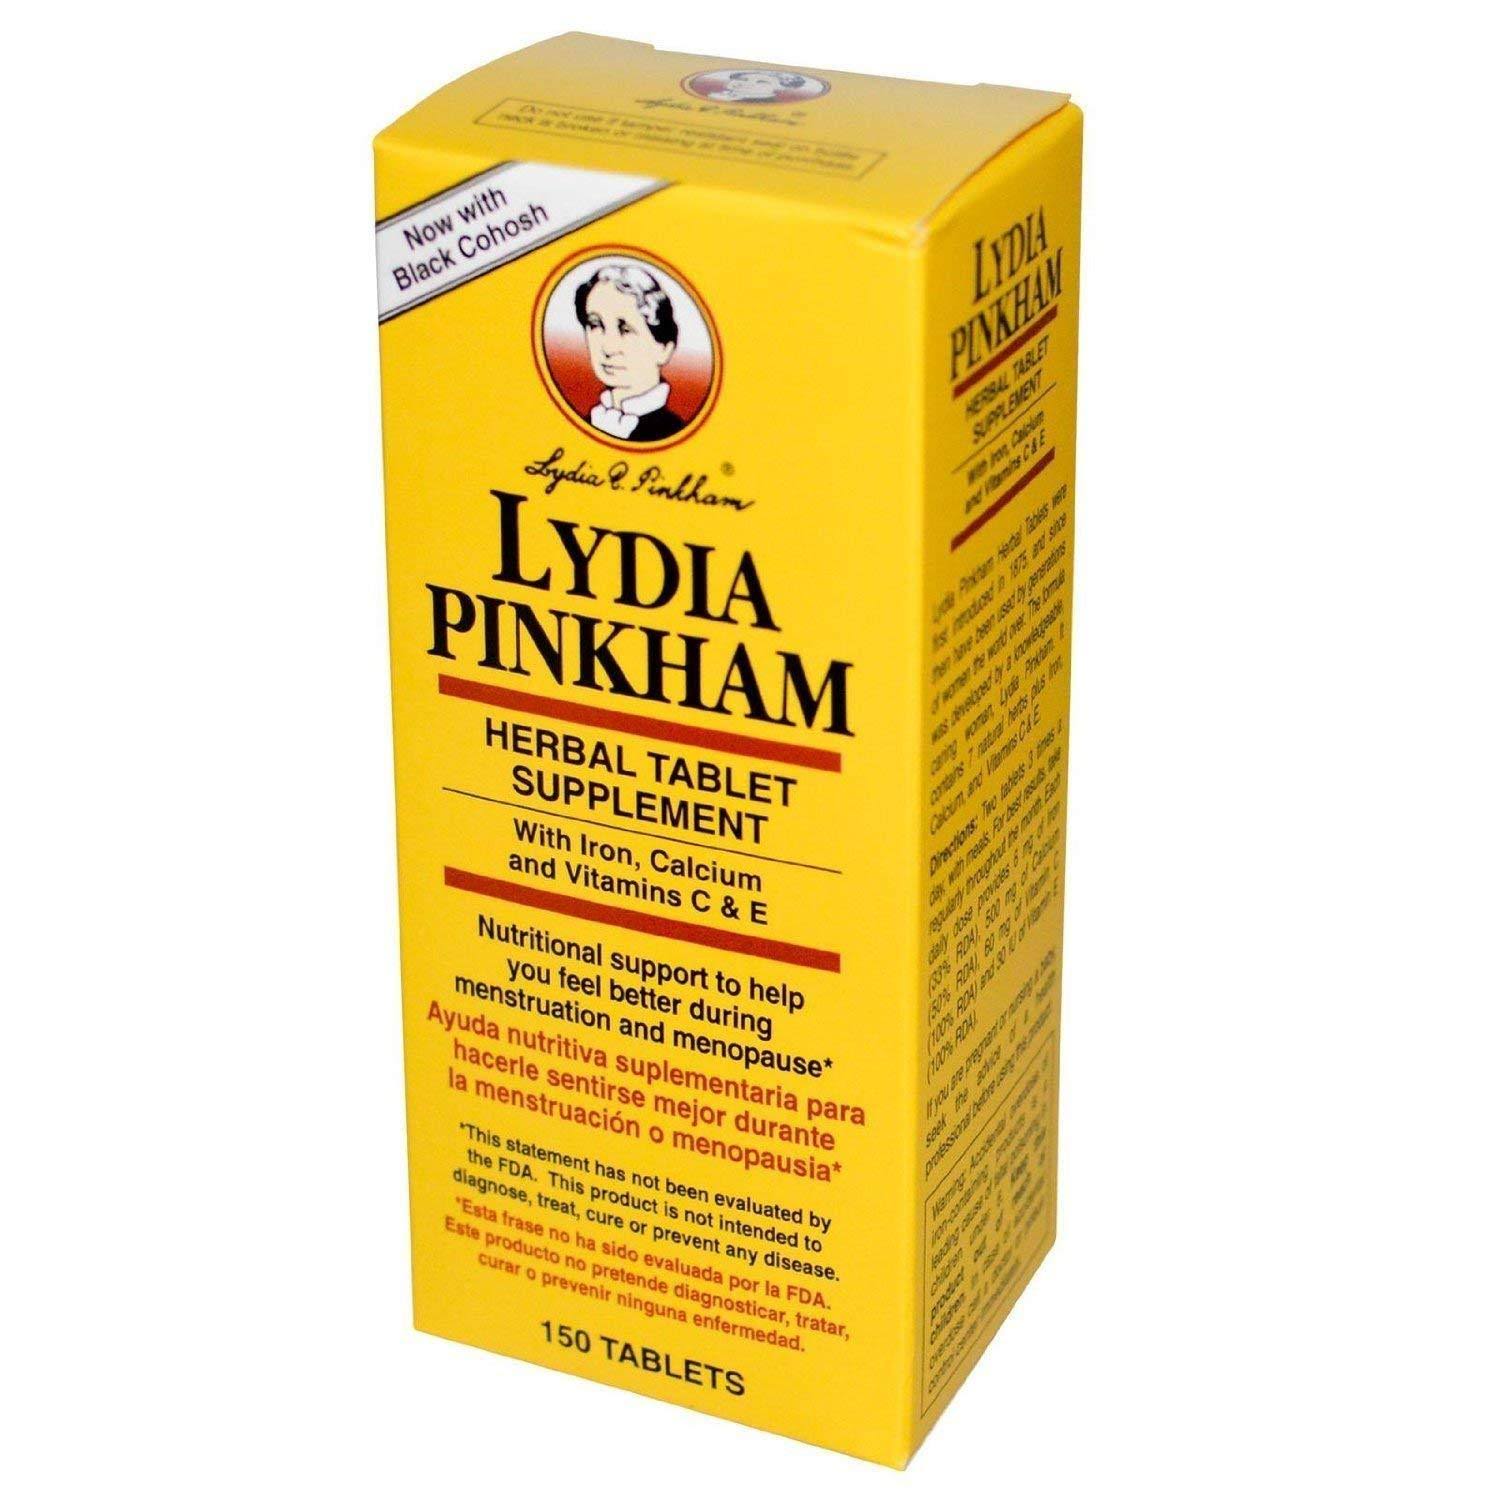 Lydia Pinkham Herbal Supplement Tablet - 72 Tablets